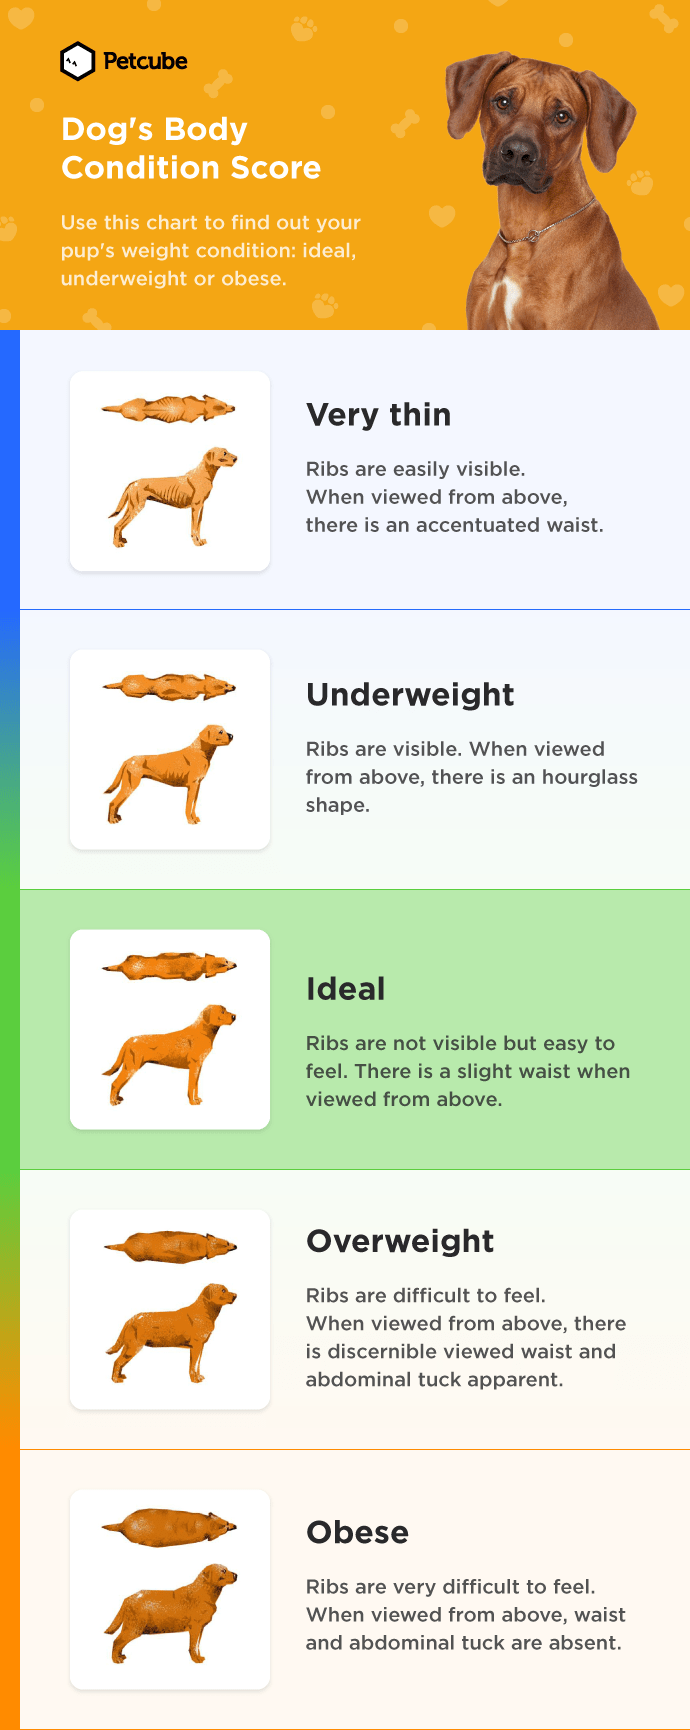 Dog's body condition score chart underweight obese